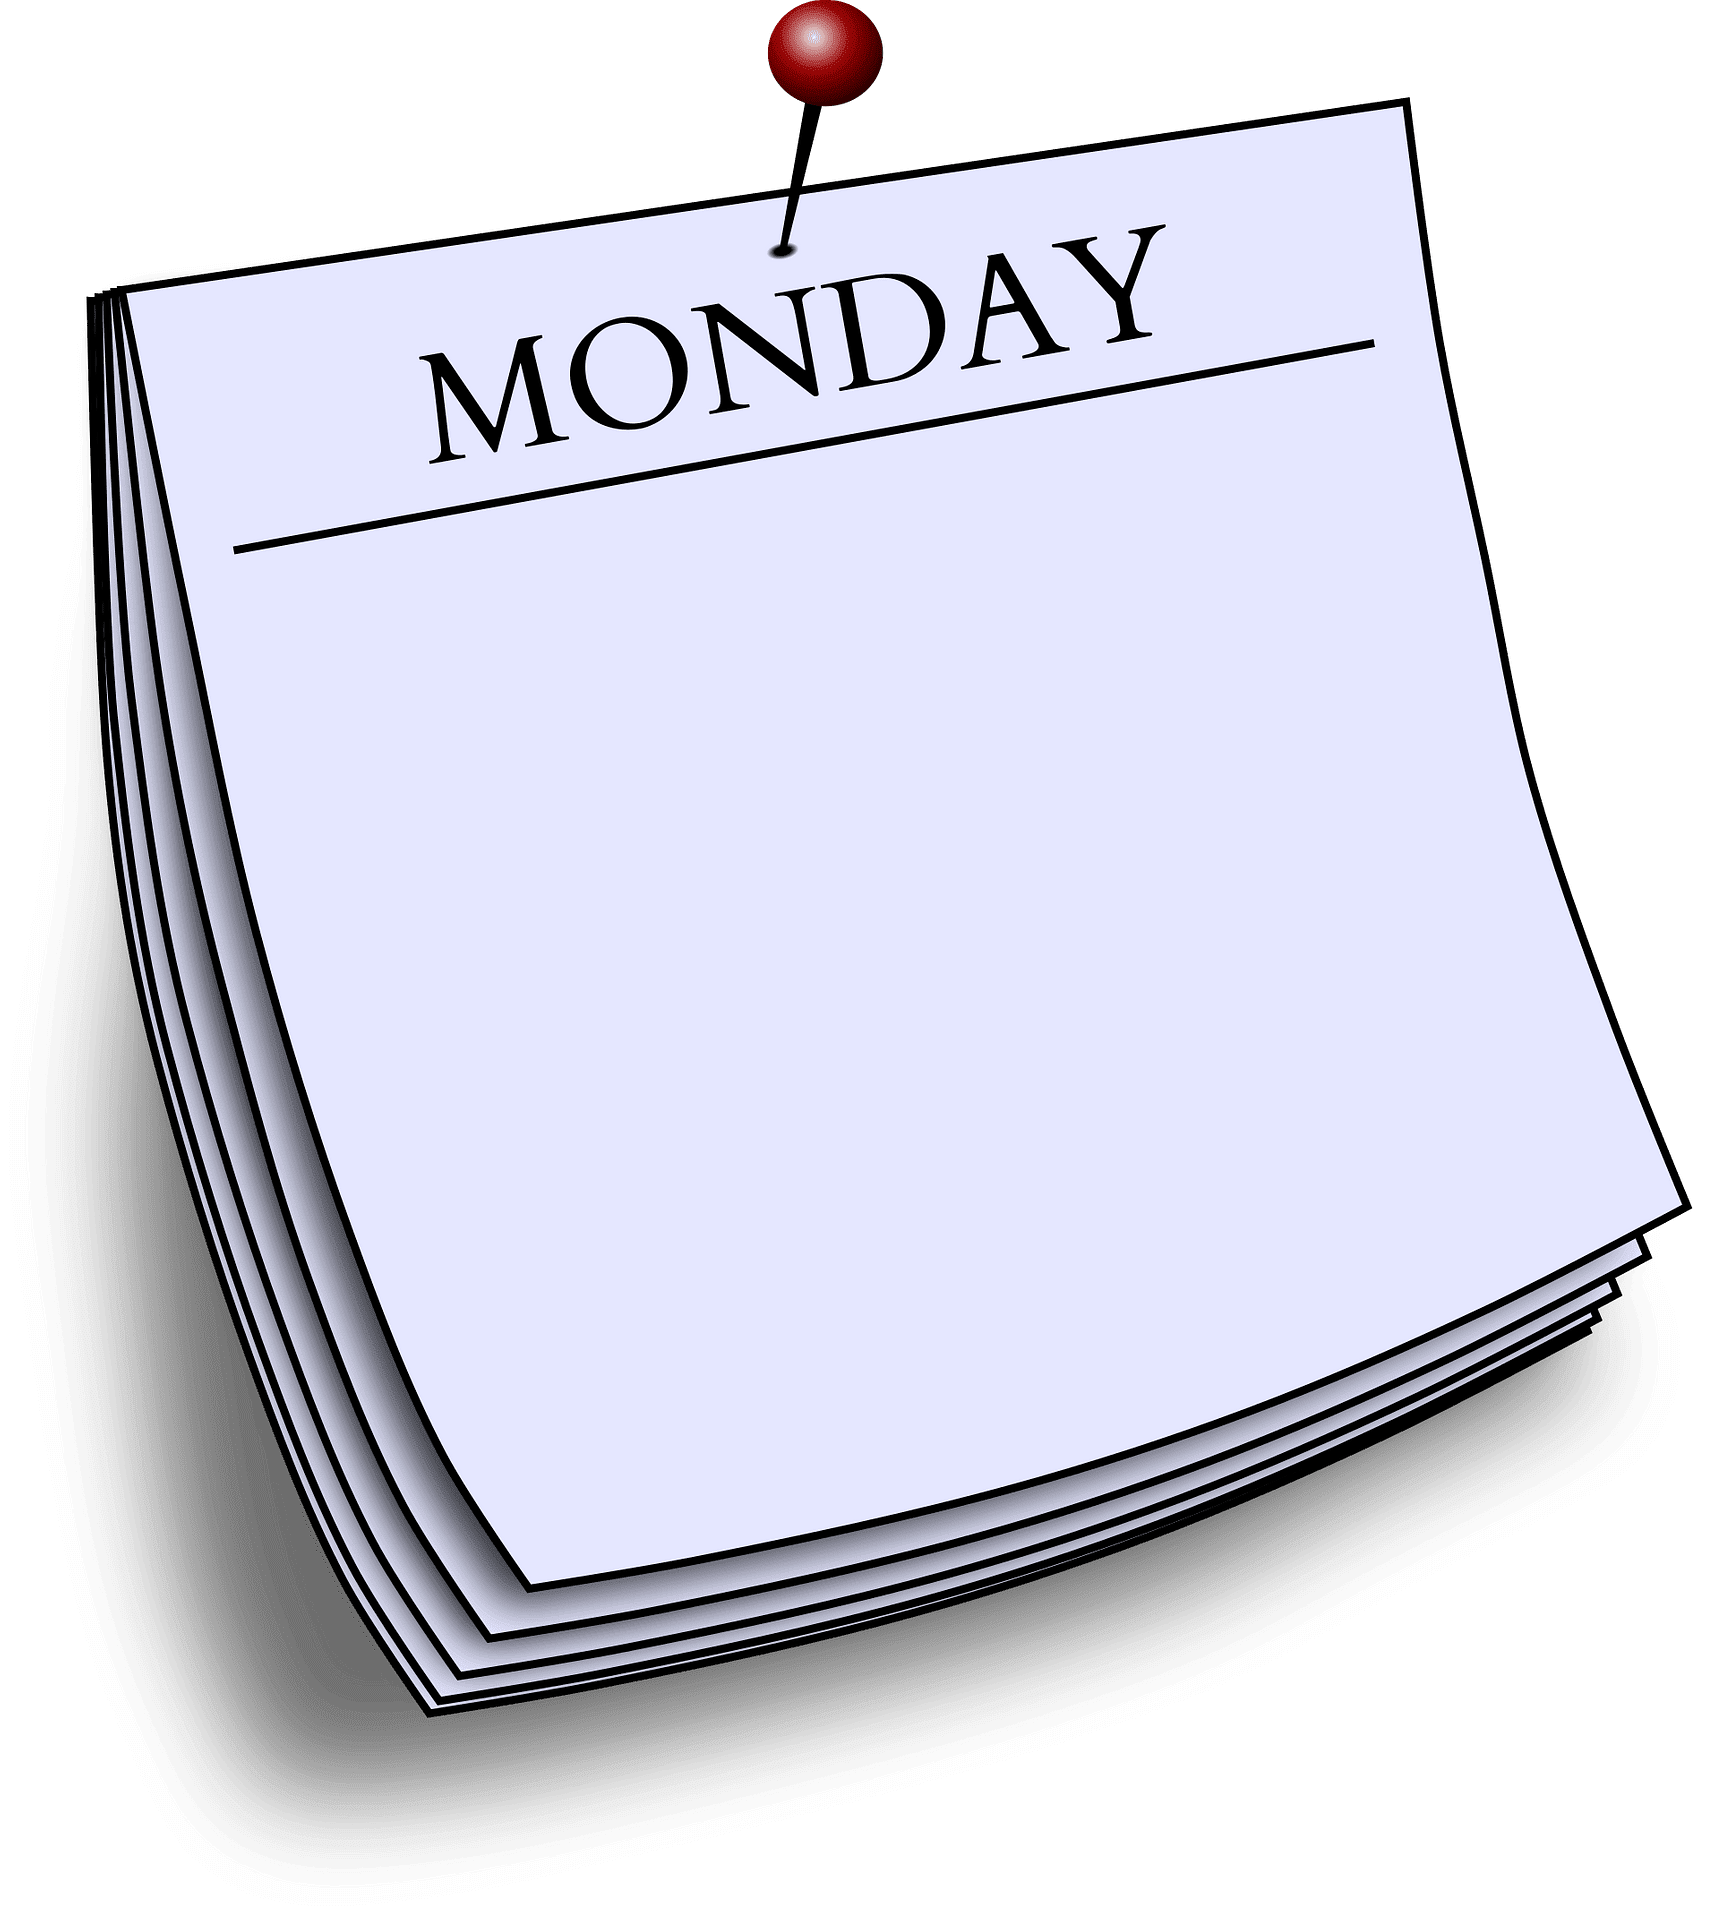 Note monday clipart background